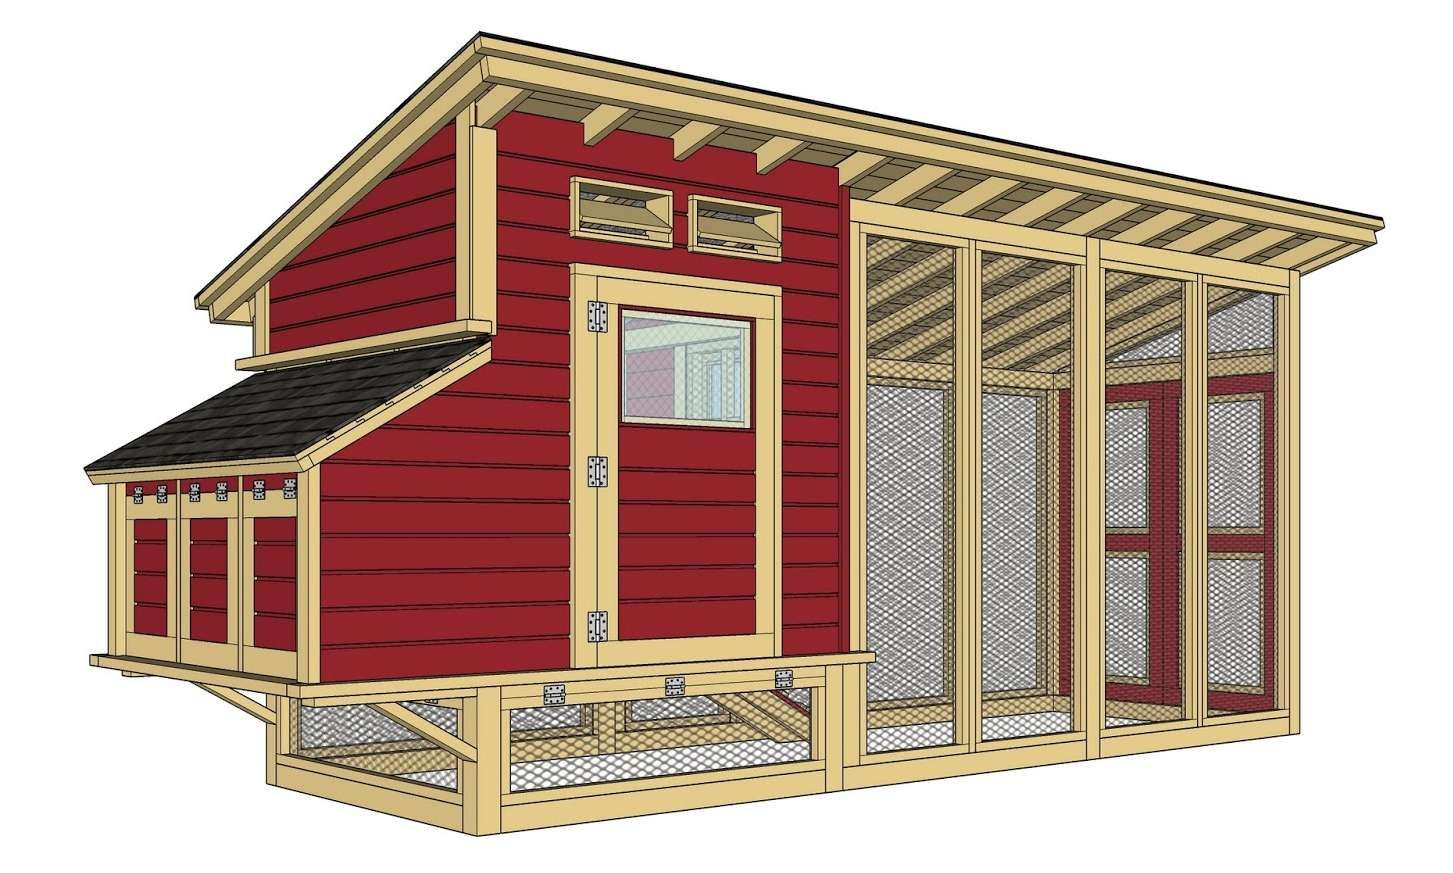 A Small Chicken Coop With The Door Open And Windows On It'S Side, In avec Plan Poulailler Pdf Gratuit